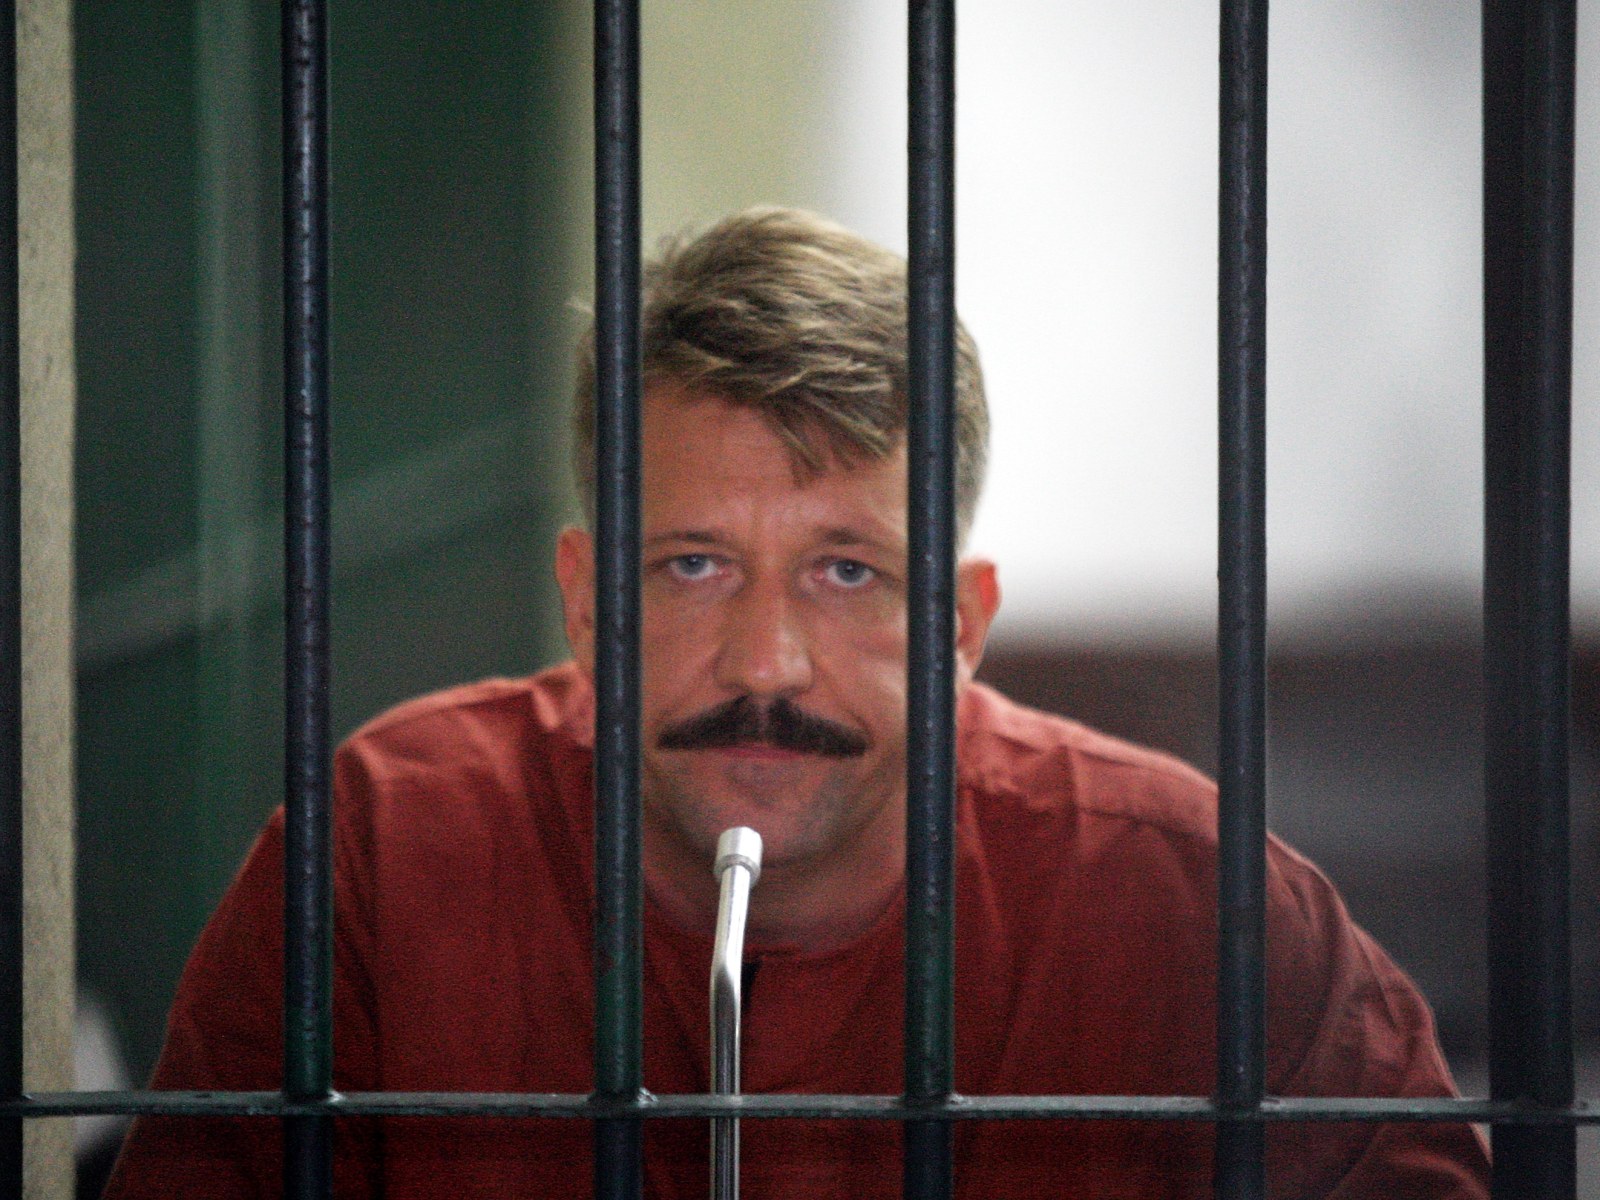 Who Is Viktor Bout? Russia’s ‘Merchant of Death’ Offered for Griner, Whelan